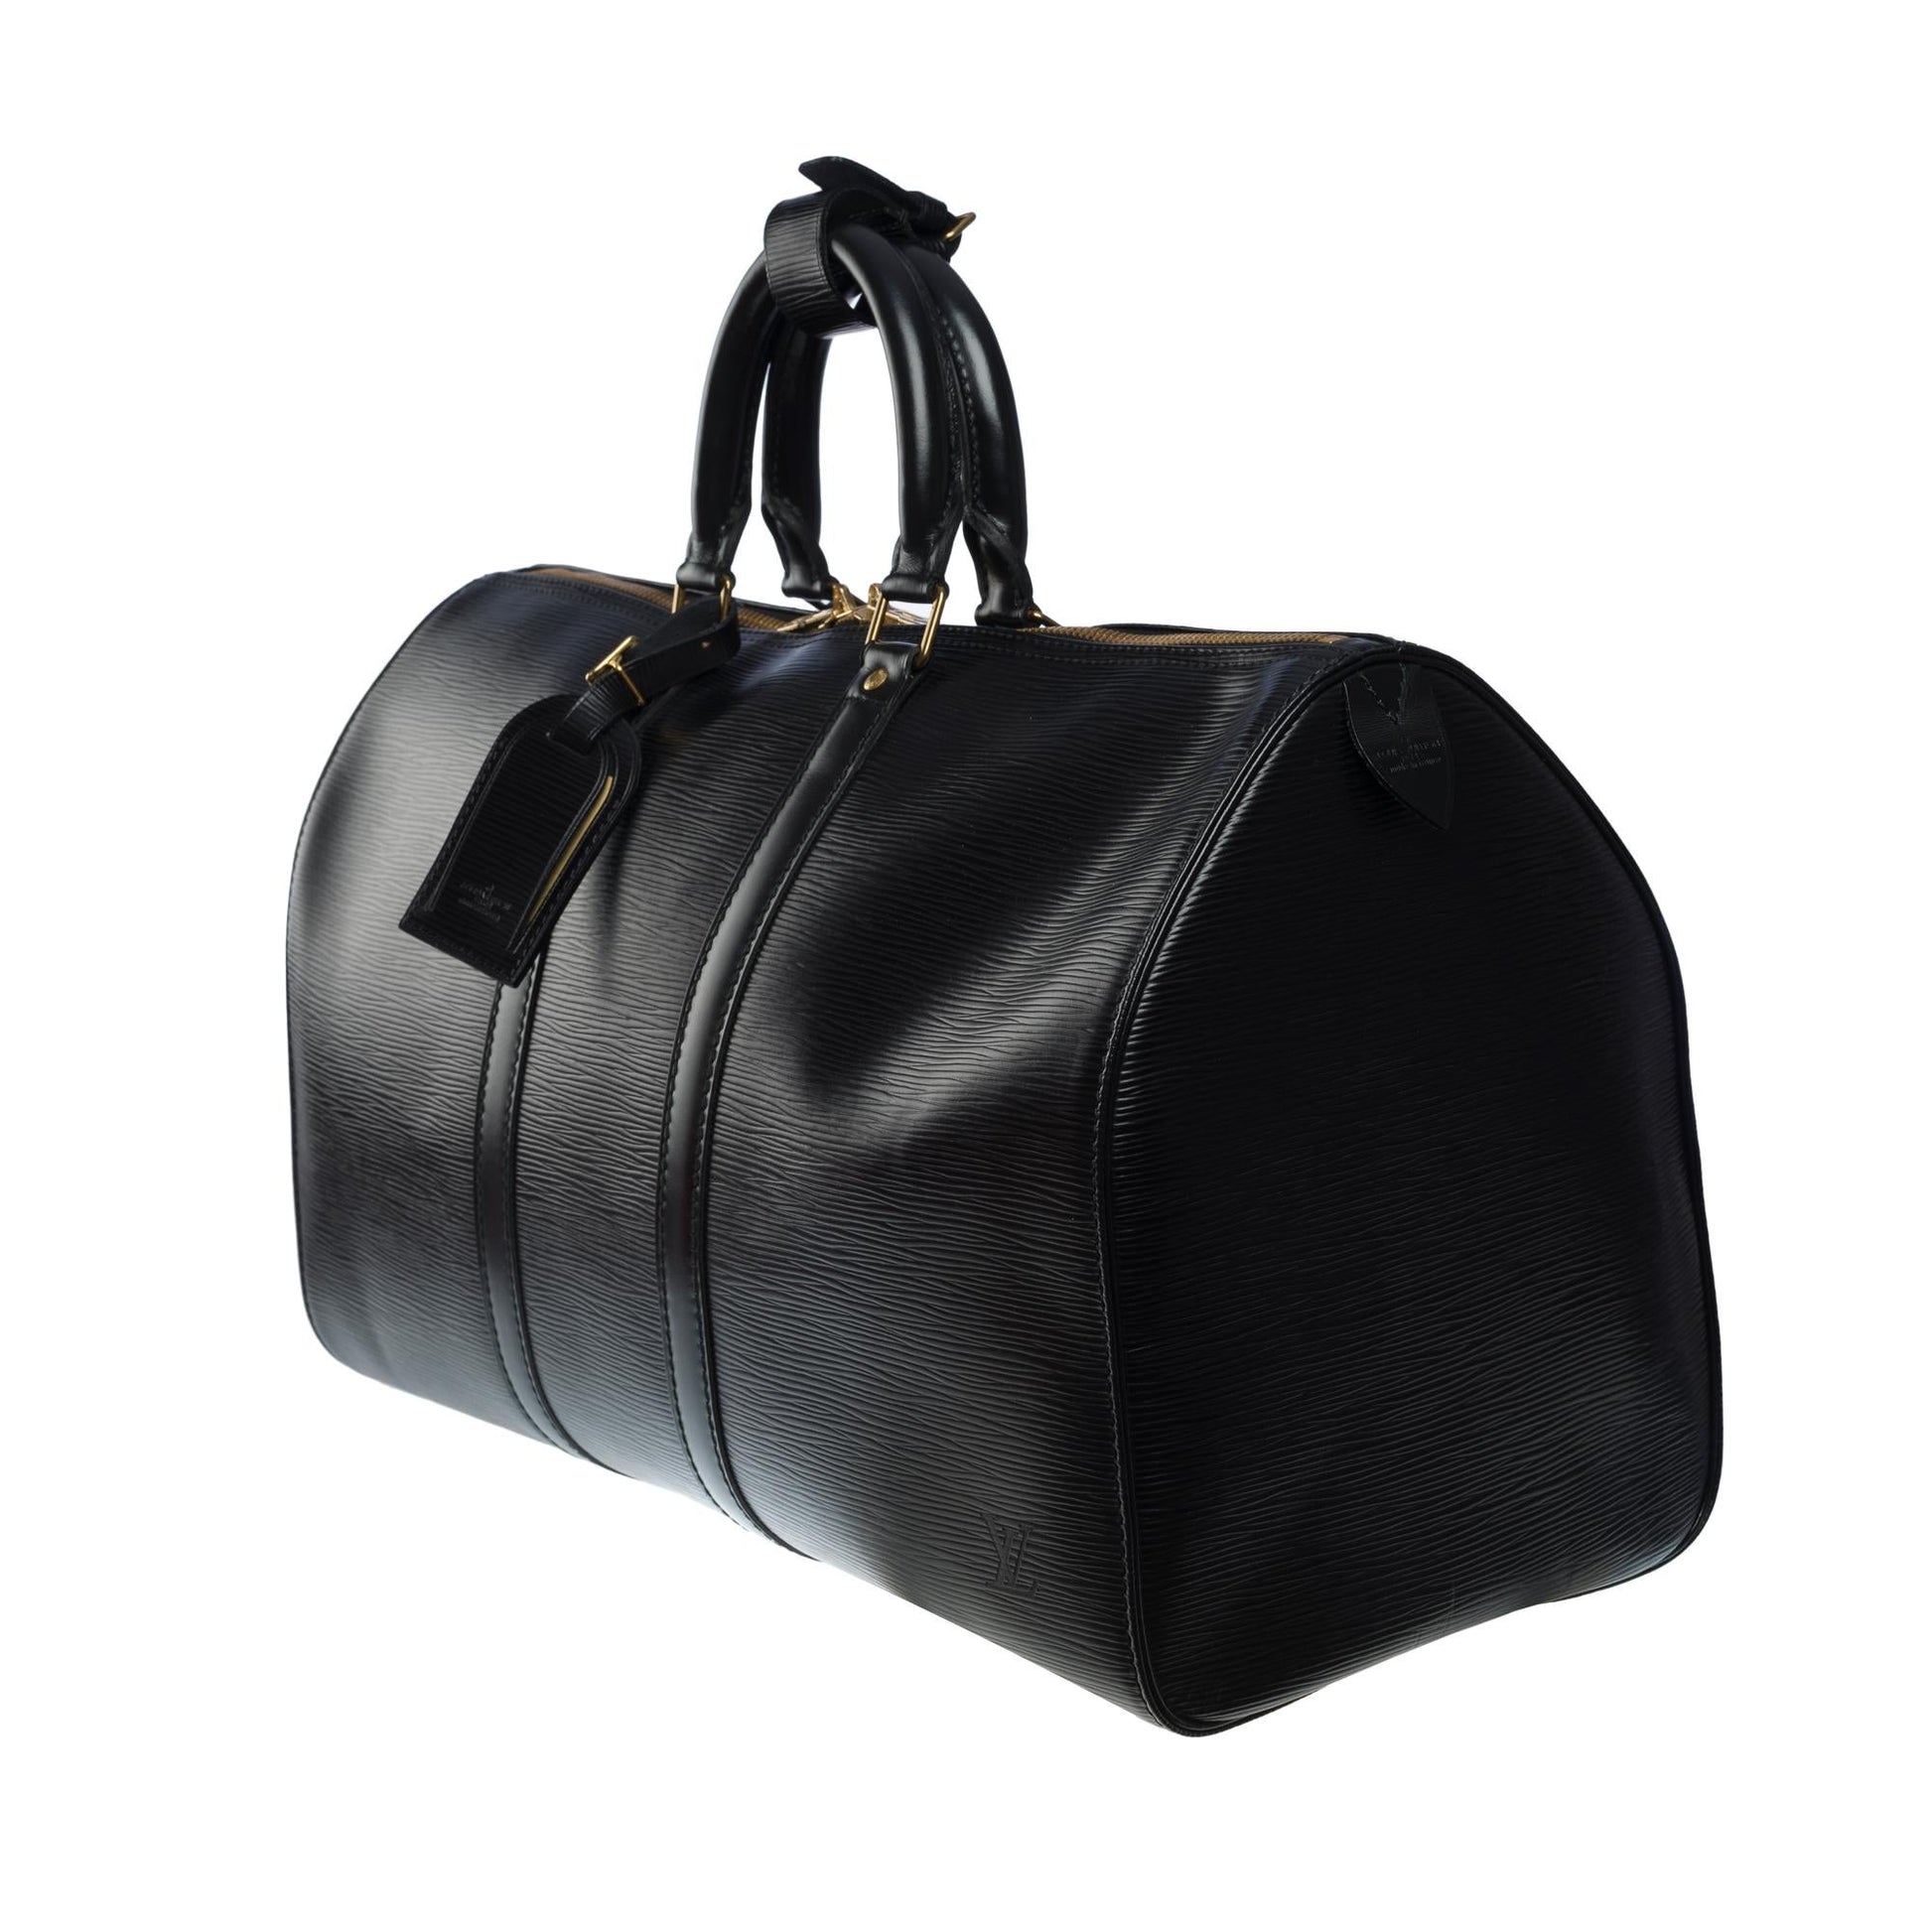 Keepall patent leather travel bag